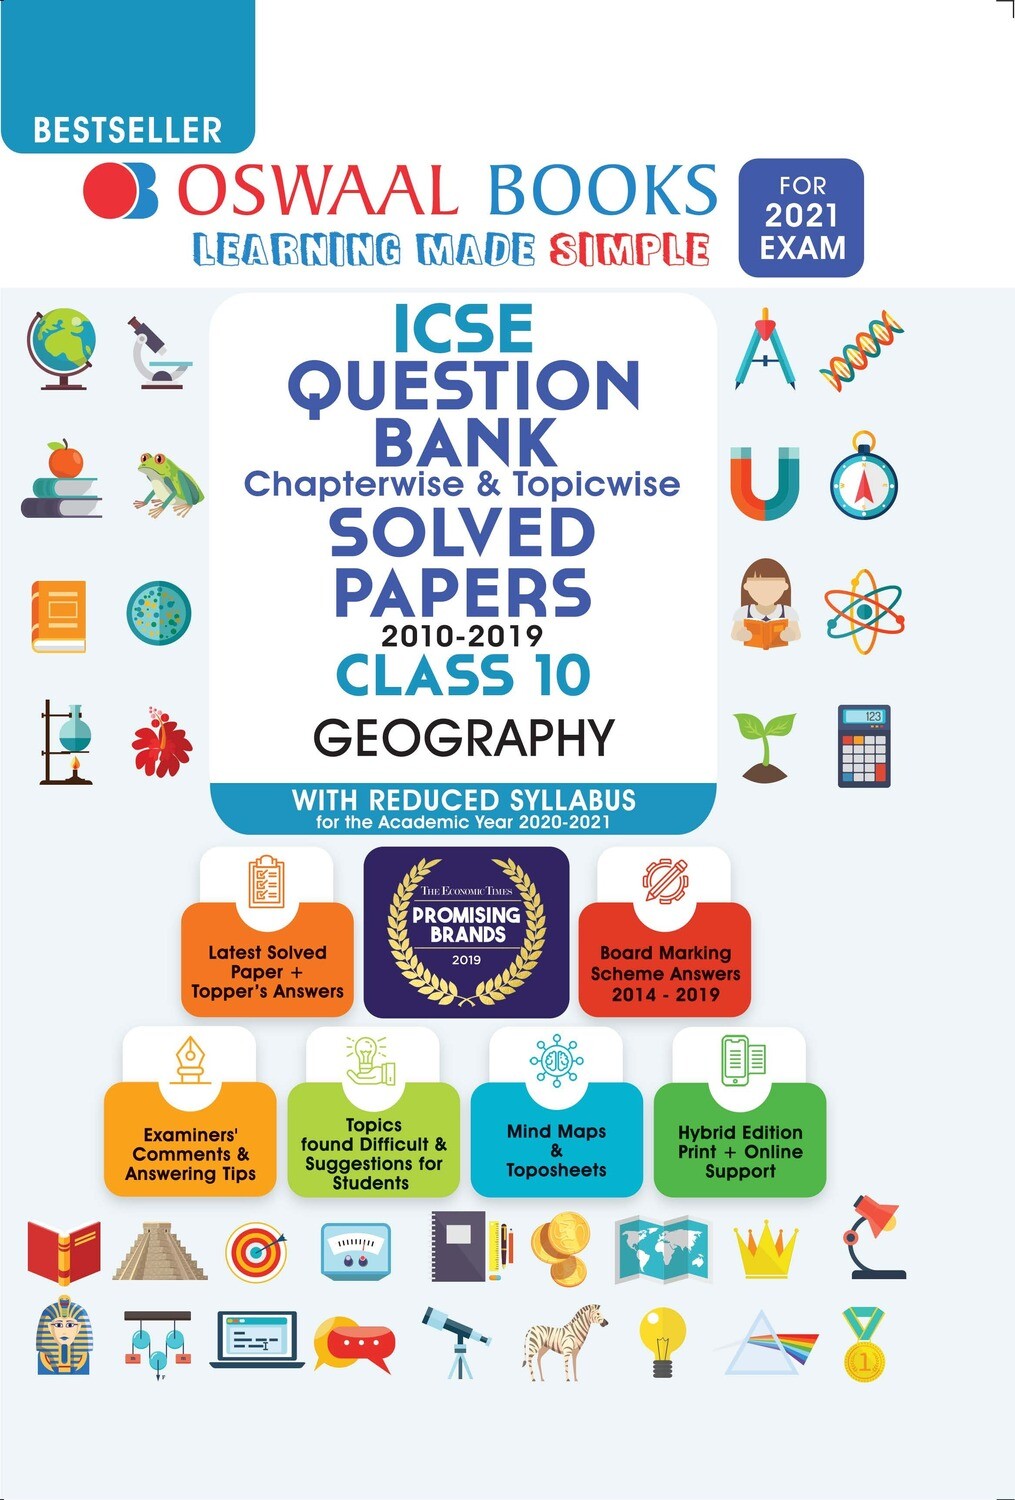 Buy e-book: Oswaal ICSE Question Bank Chapterwise & Topicwise Solved Papers, Geography, Class 10 (Reduced Syllab